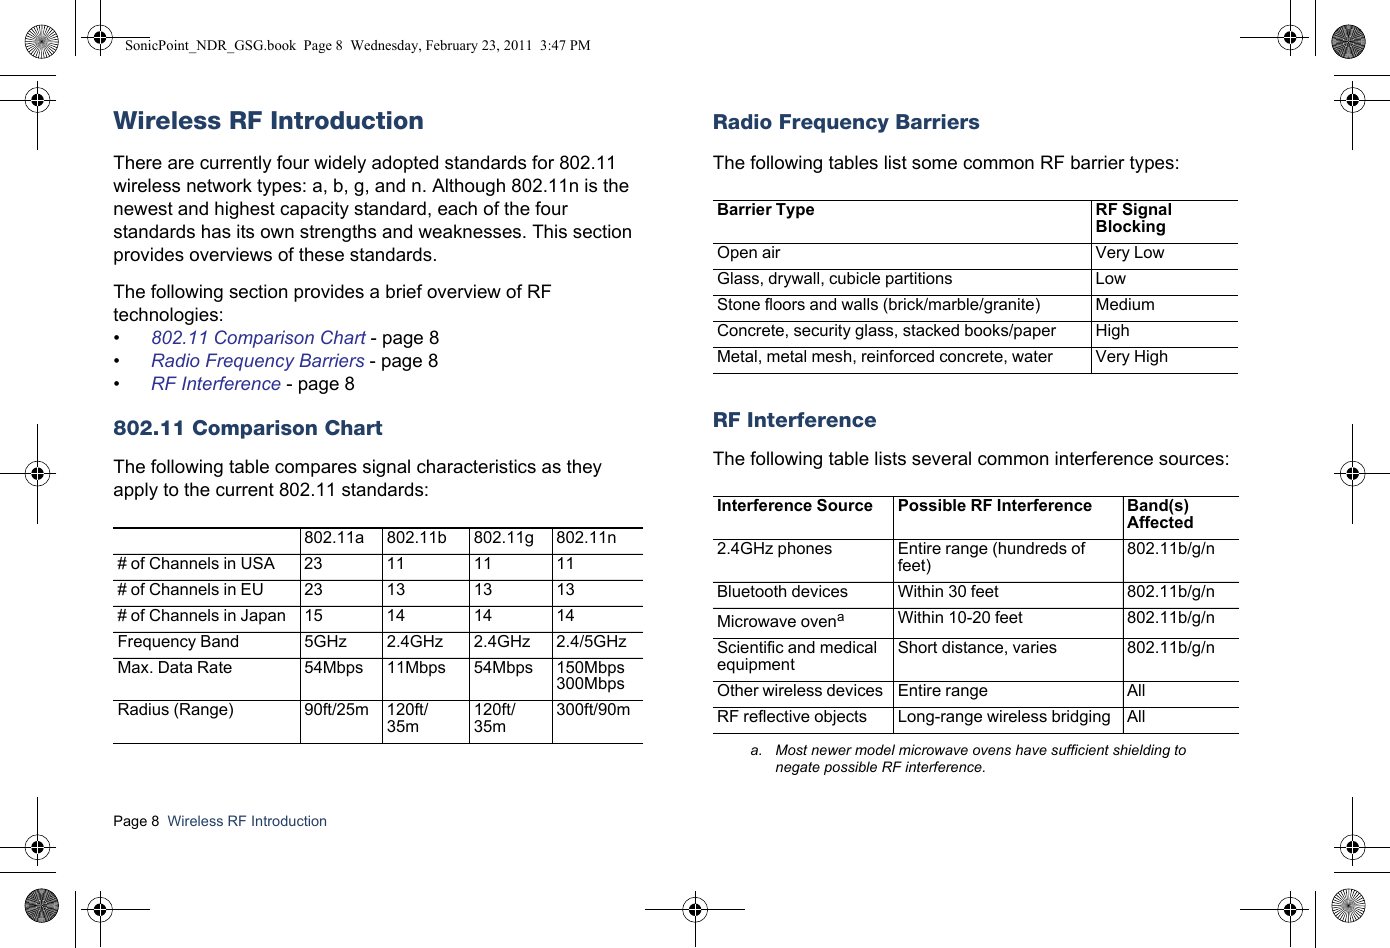 Page 8  Wireless RF Introduction  Wireless RF IntroductionThere are currently four widely adopted standards for 802.11 wireless network types: a, b, g, and n. Although 802.11n is the newest and highest capacity standard, each of the four standards has its own strengths and weaknesses. This section provides overviews of these standards.The following section provides a brief overview of RF technologies:•802.11 Comparison Chart - page 8•Radio Frequency Barriers - page 8•RF Interference - page 8802.11 Comparison ChartThe following table compares signal characteristics as they apply to the current 802.11 standards:Radio Frequency BarriersThe following tables list some common RF barrier types:RF InterferenceThe following table lists several common interference sources:802.11a 802.11b 802.11g 802.11n# of Channels in USA 23 11 11 11# of Channels in EU 23 13 13 13# of Channels in Japan 15 14 14 14Frequency Band 5GHz 2.4GHz 2.4GHz 2.4/5GHzMax. Data Rate 54Mbps 11Mbps 54Mbps 150Mbps300MbpsRadius (Range) 90ft/25m 120ft/35m120ft/35m300ft/90mBarrier Type RF Signal BlockingOpen air Very LowGlass, drywall, cubicle partitions LowStone floors and walls (brick/marble/granite) MediumConcrete, security glass, stacked books/paper HighMetal, metal mesh, reinforced concrete, water Very HighInterference Source Possible RF Interference Band(s) Affected2.4GHz phones Entire range (hundreds of feet)802.11b/g/nBluetooth devices Within 30 feet 802.11b/g/nMicrowave ovenaa. Most newer model microwave ovens have sufficient shielding to negate possible RF interference.Within 10-20 feet 802.11b/g/nScientific and medical equipmentShort distance, varies 802.11b/g/nOther wireless devices Entire range AllRF reflective objects Long-range wireless bridging AllSonicPoint_NDR_GSG.book  Page 8  Wednesday, February 23, 2011  3:47 PM